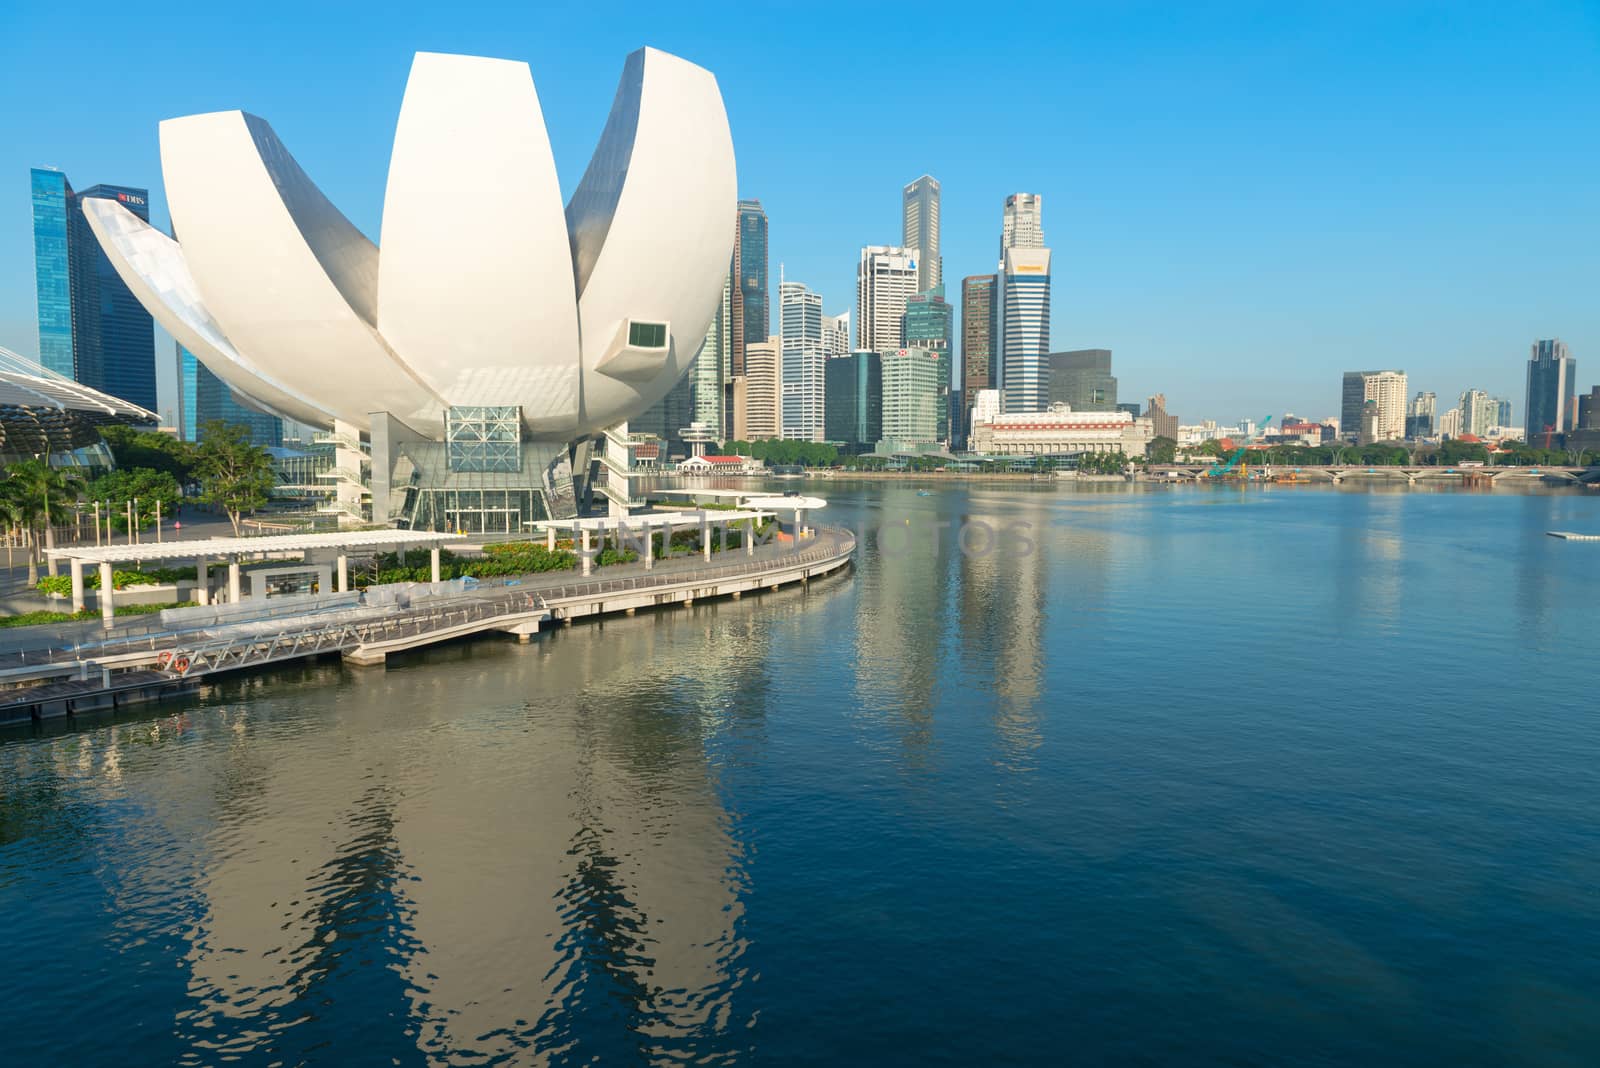 SINGAPORE - JUN 01, 2013: ArtScience Museum in Singapore. It is one of the attractions at Marina Bay Sands. It has 21 gallery spaces with a total area of 6,000 square meters. 